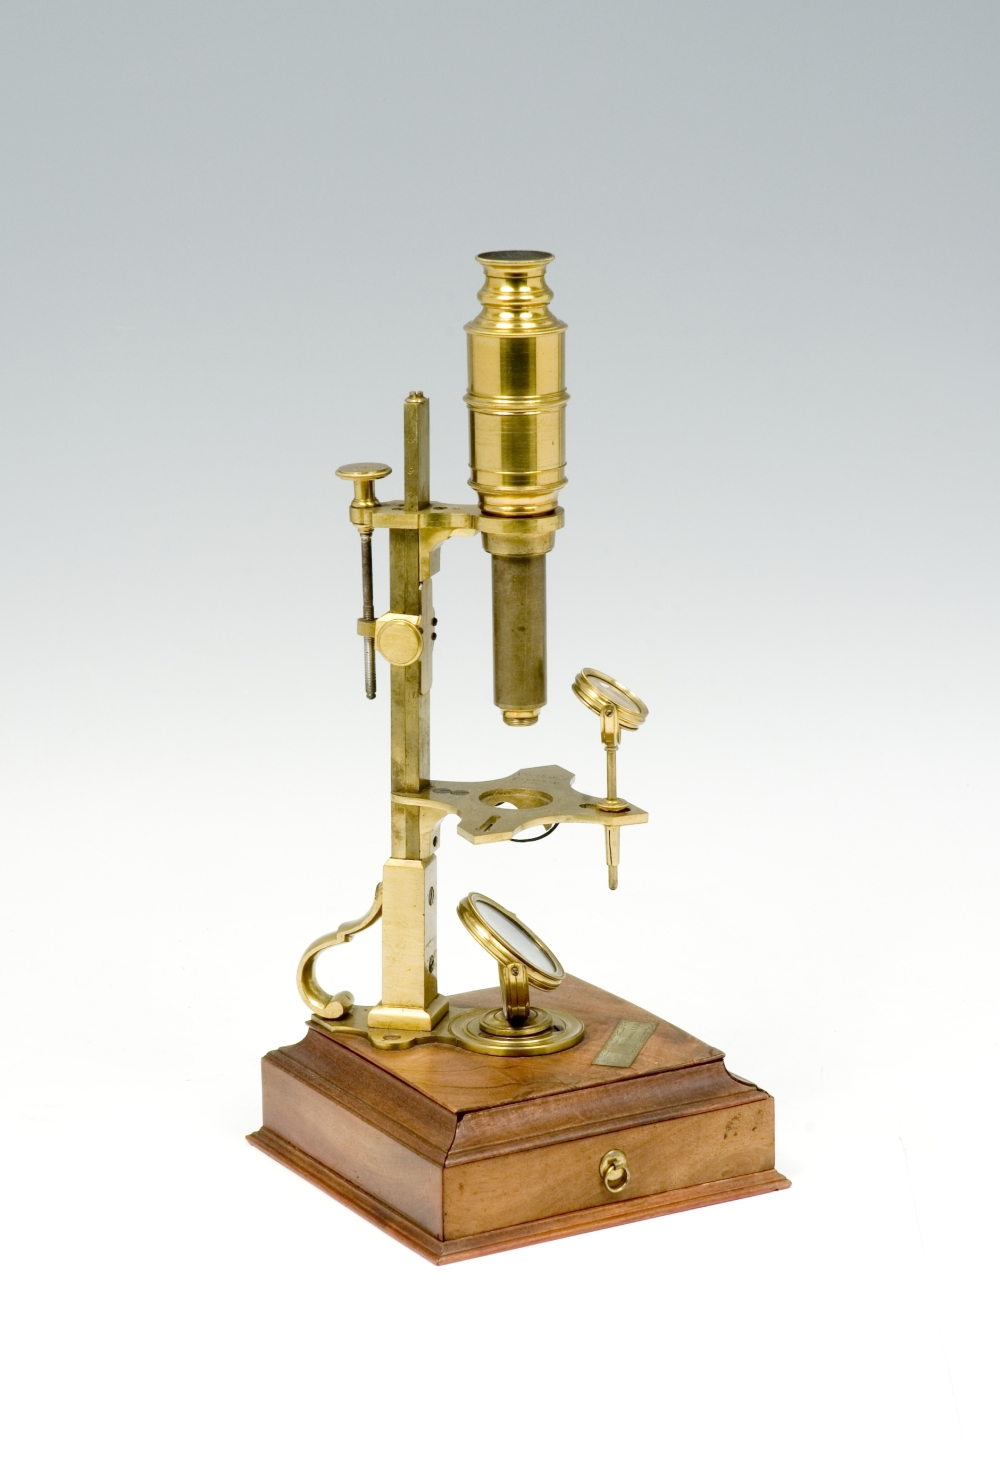 preview image for Cuff-Type Compound Microscope, by Dollond, London, c. 1761 with Case and Accessories